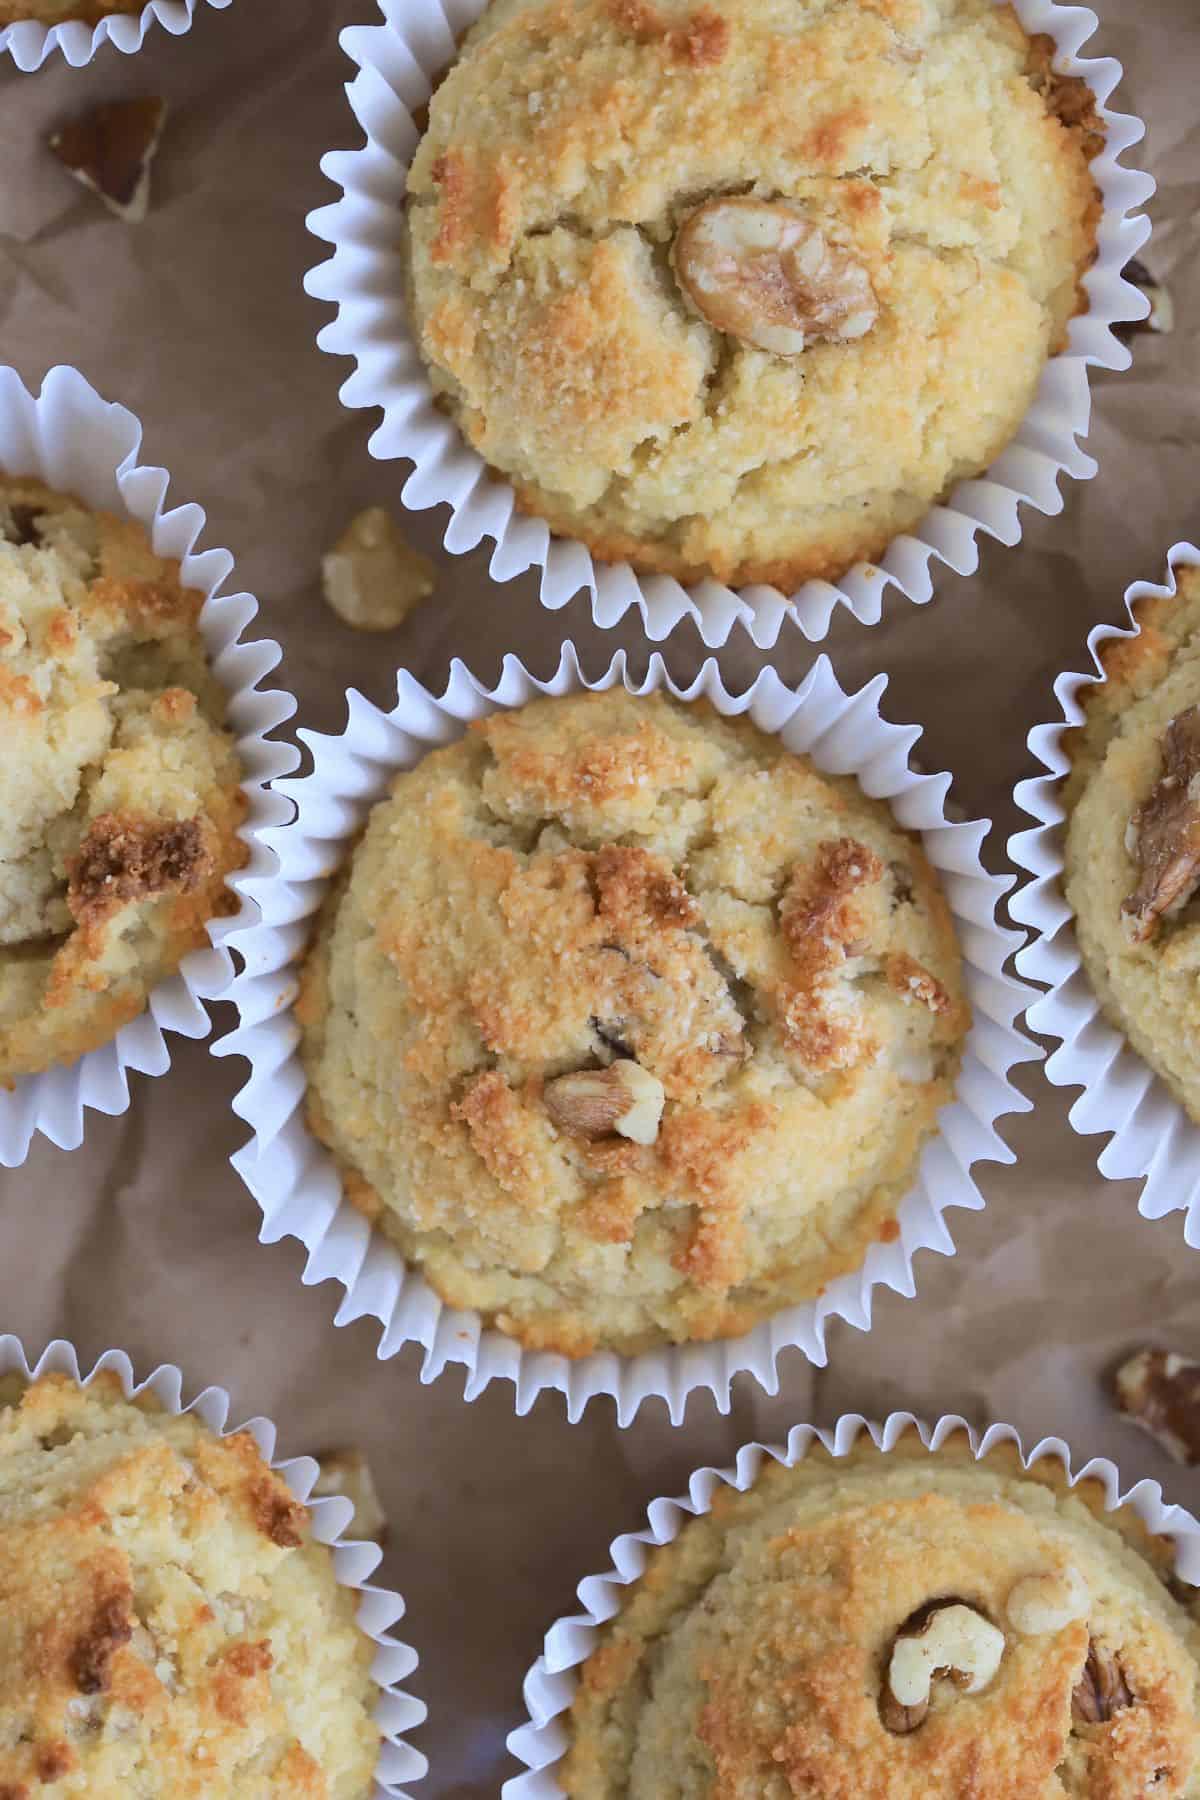 sugar free banana muffins on a brown parchment paper with scattered walnut piecces.